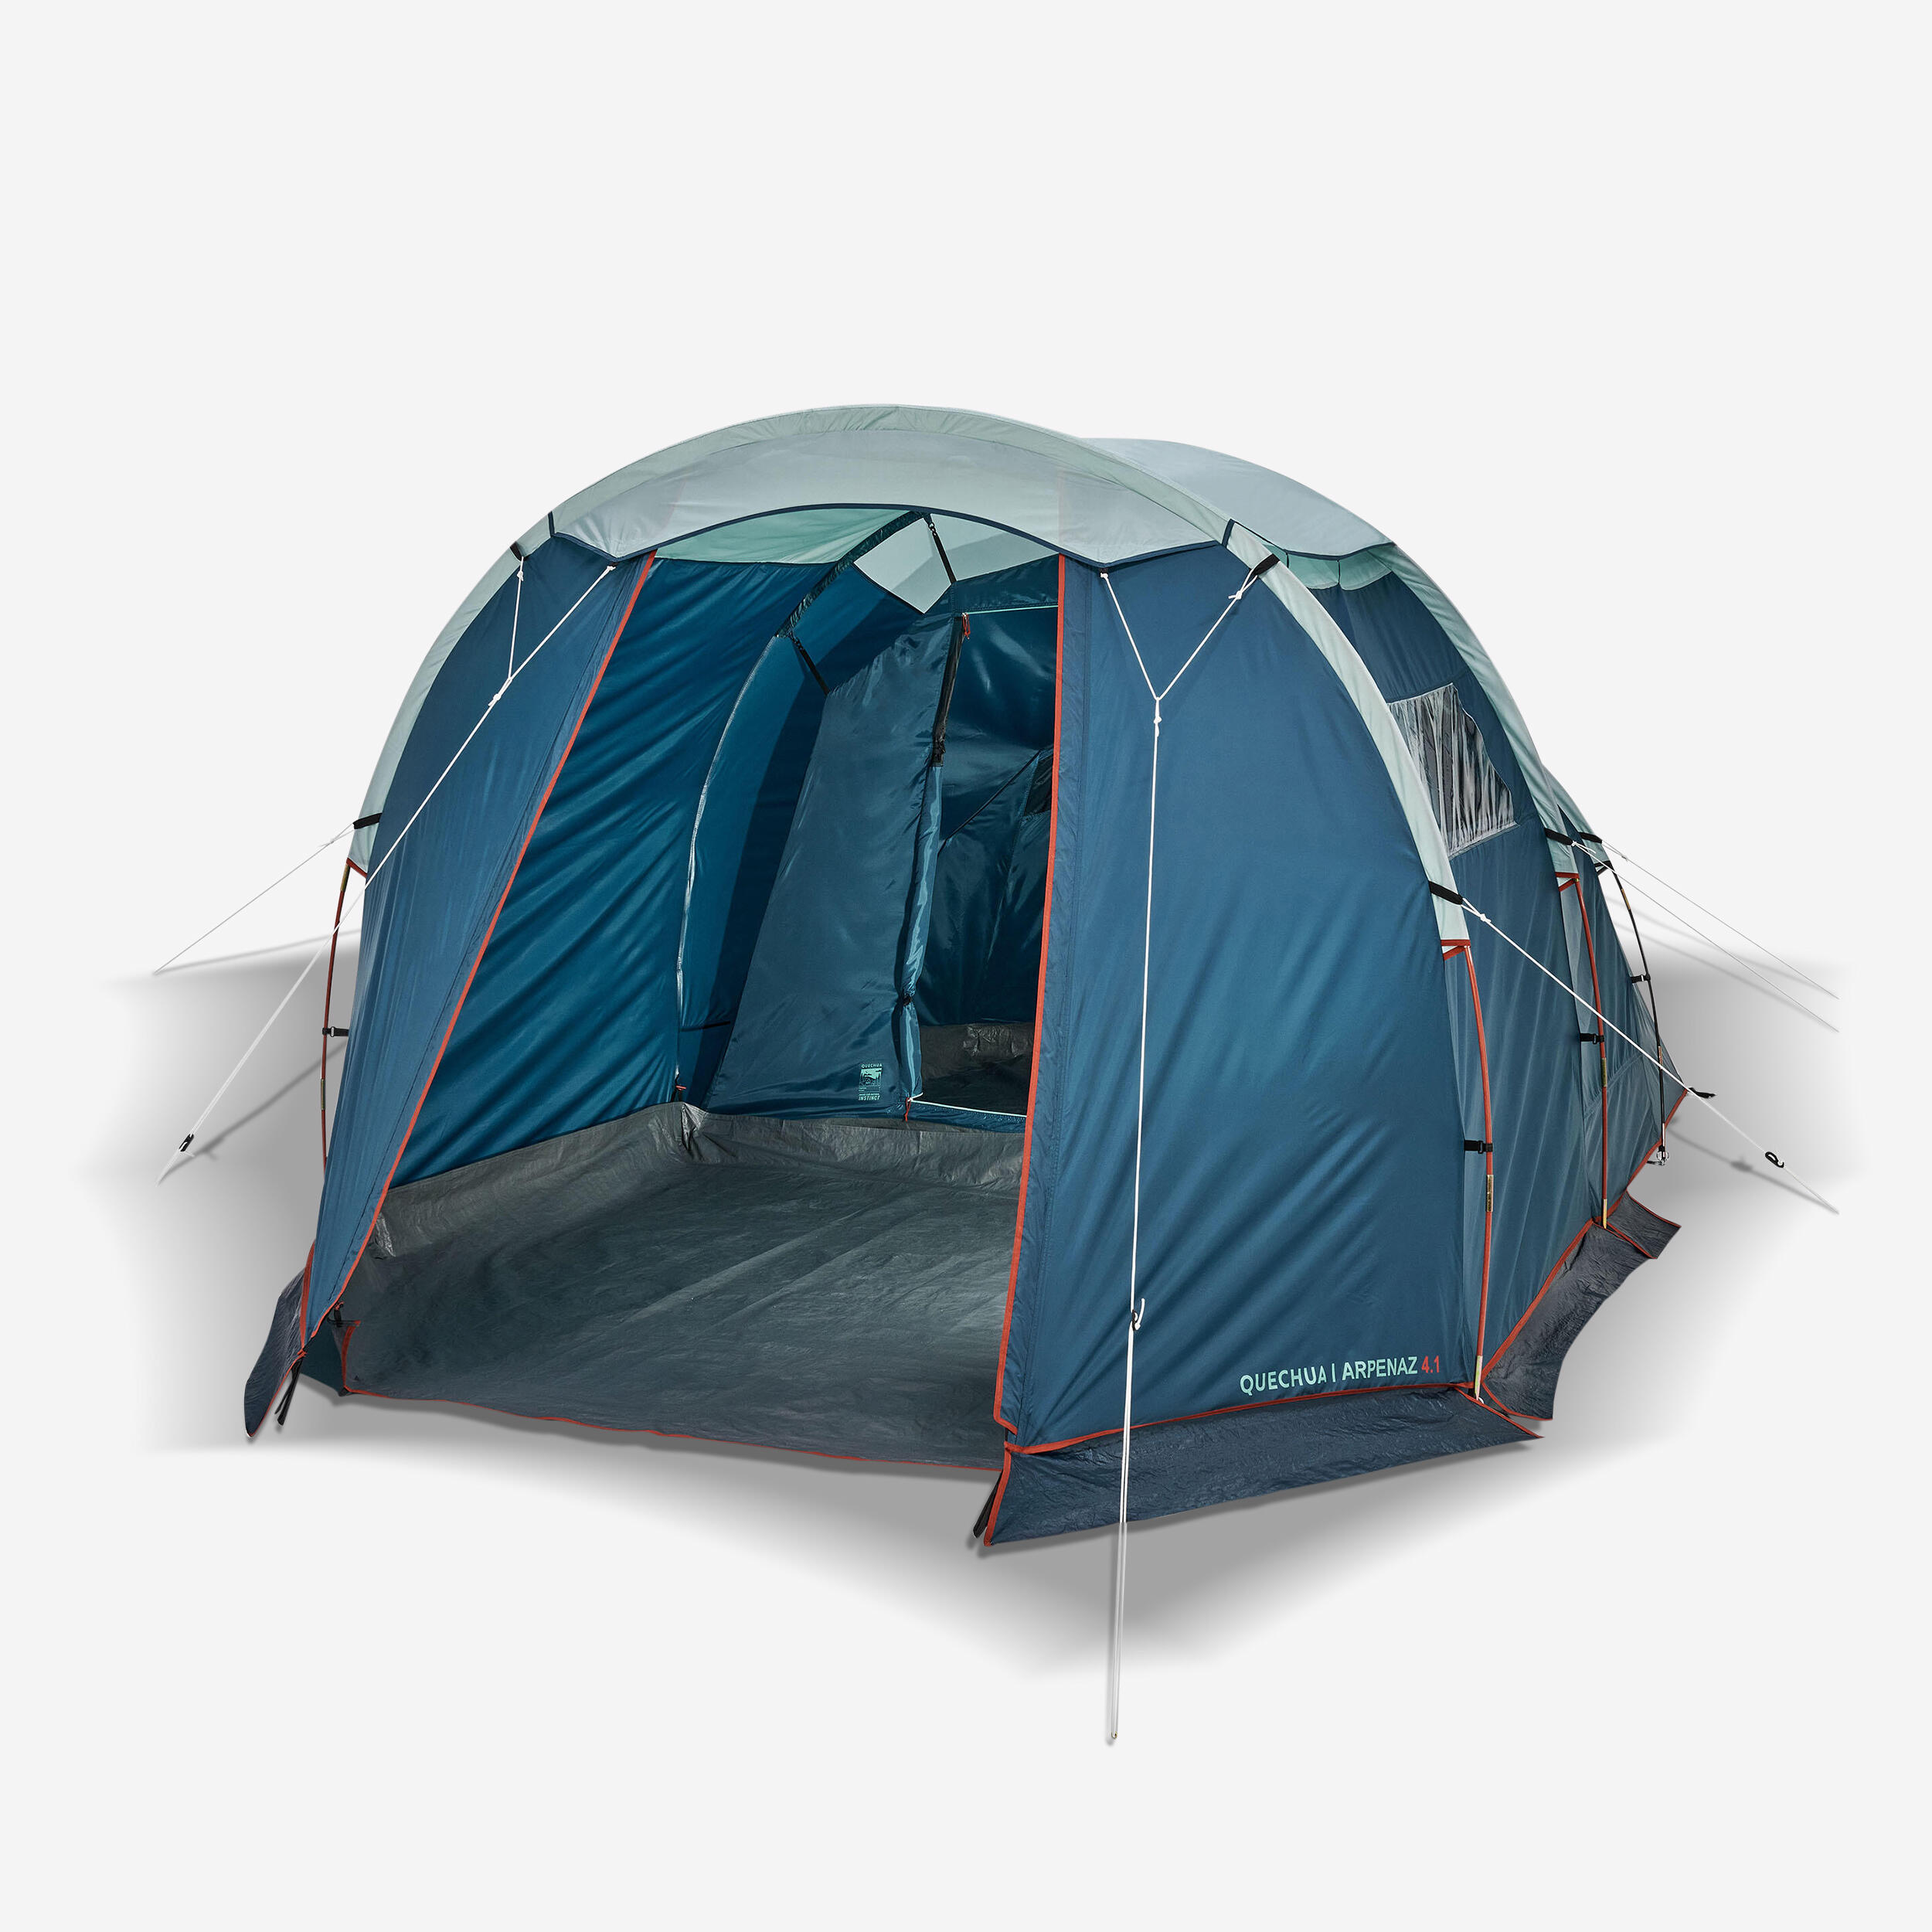 Camping tent with poles - Arpenaz 4.1 - 4 Person - 1 Bedroom 1/17